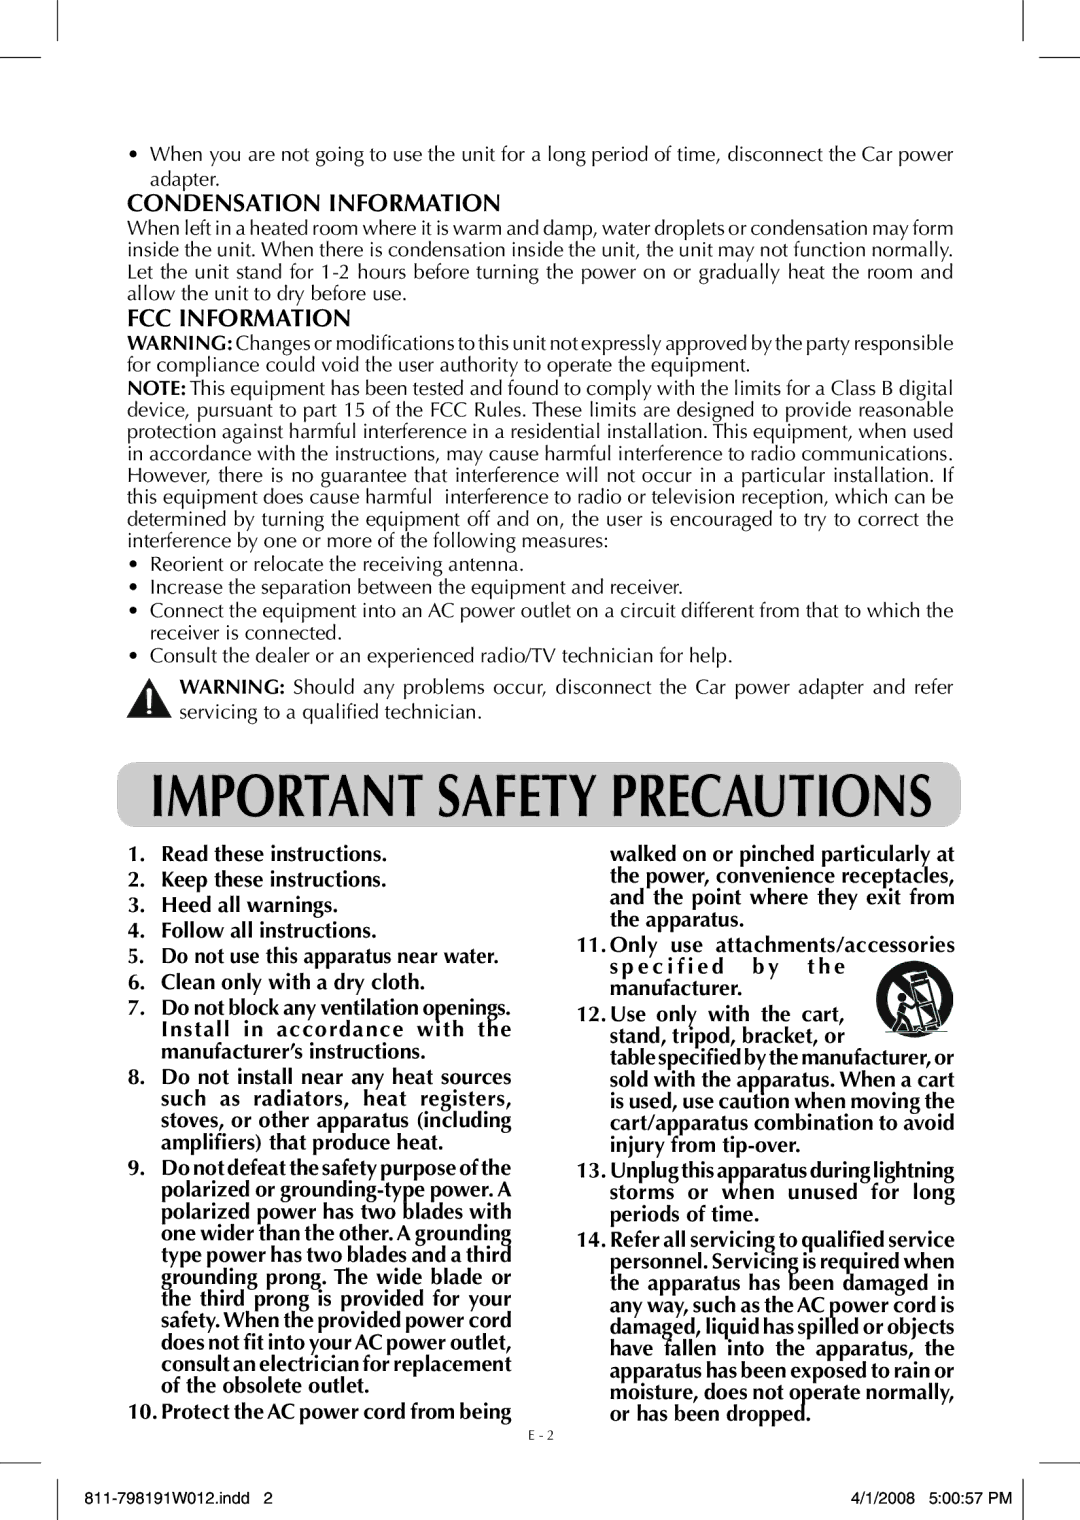 Venturer PVS7980 owner manual Condensation Information, FCC Information, Clean only with a dry cloth 